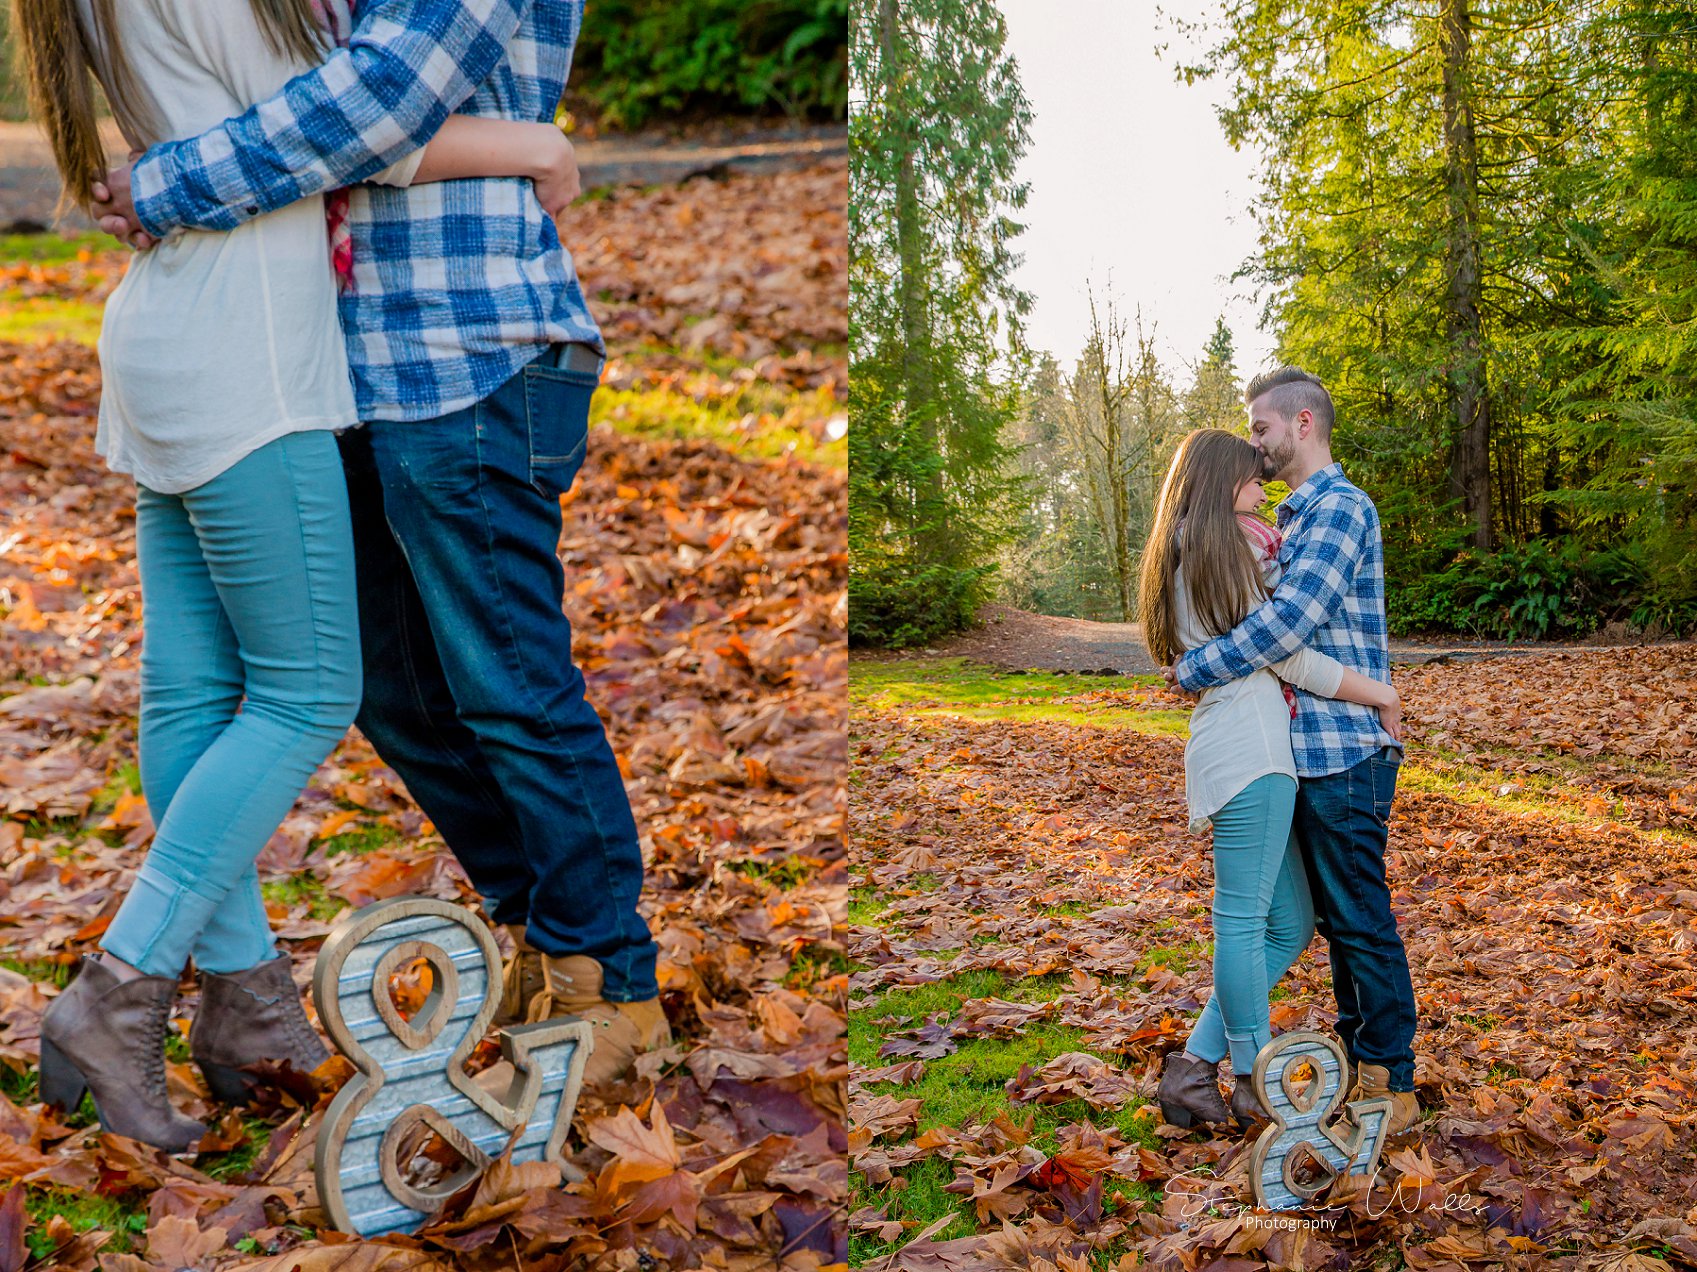 Making our own Tribe | The Lookout Lodge Engagement Session | Snohomish WA Wedding Photographer